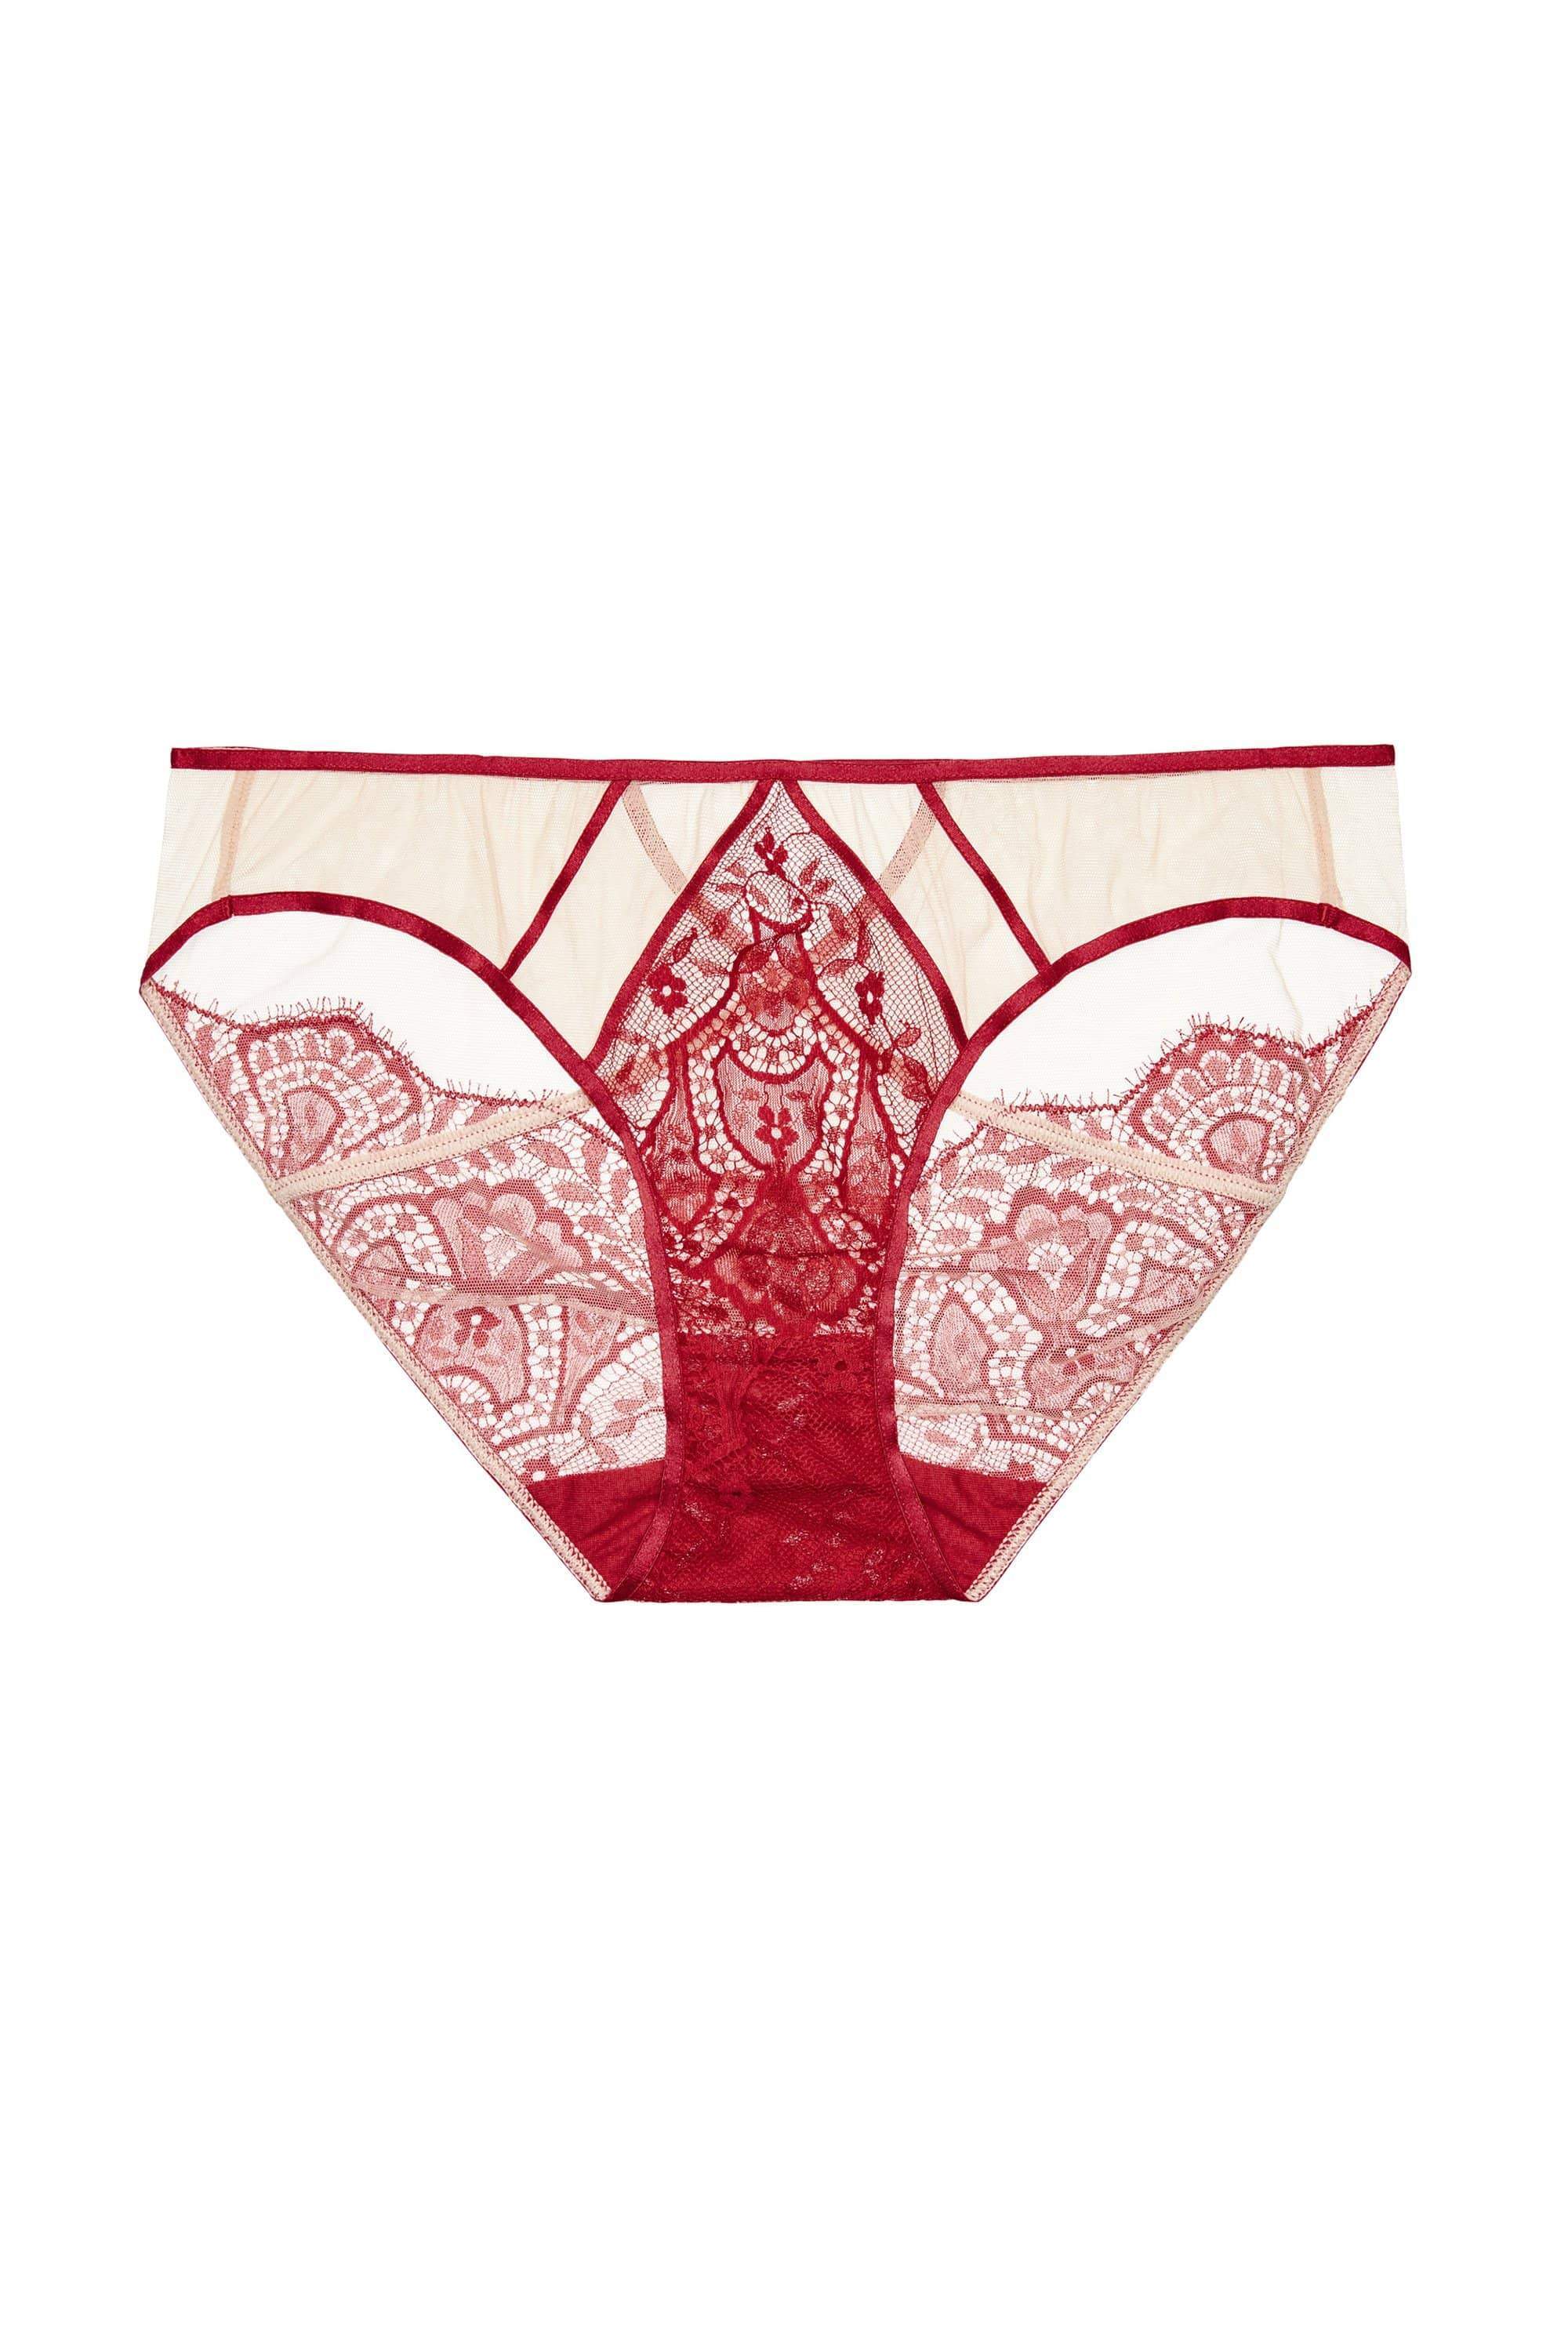 Playful Promises | Dita Von Teese Red Maestra Briefs | Red Lingerie UK